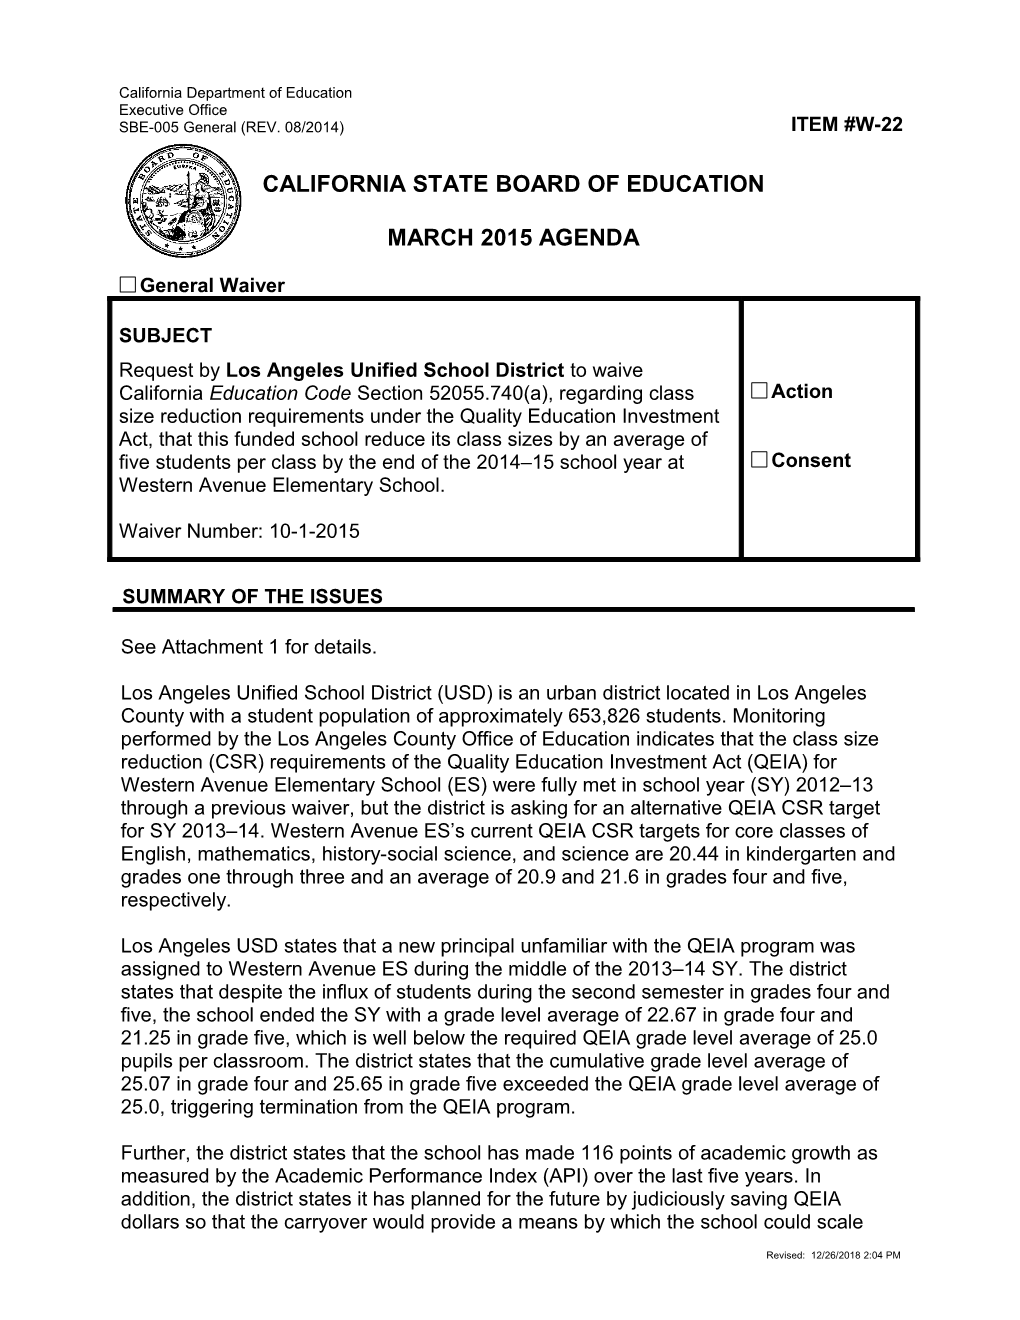 March 2015 Waiver Item W-22 - Meeting Agendas (CA State Board of Education)